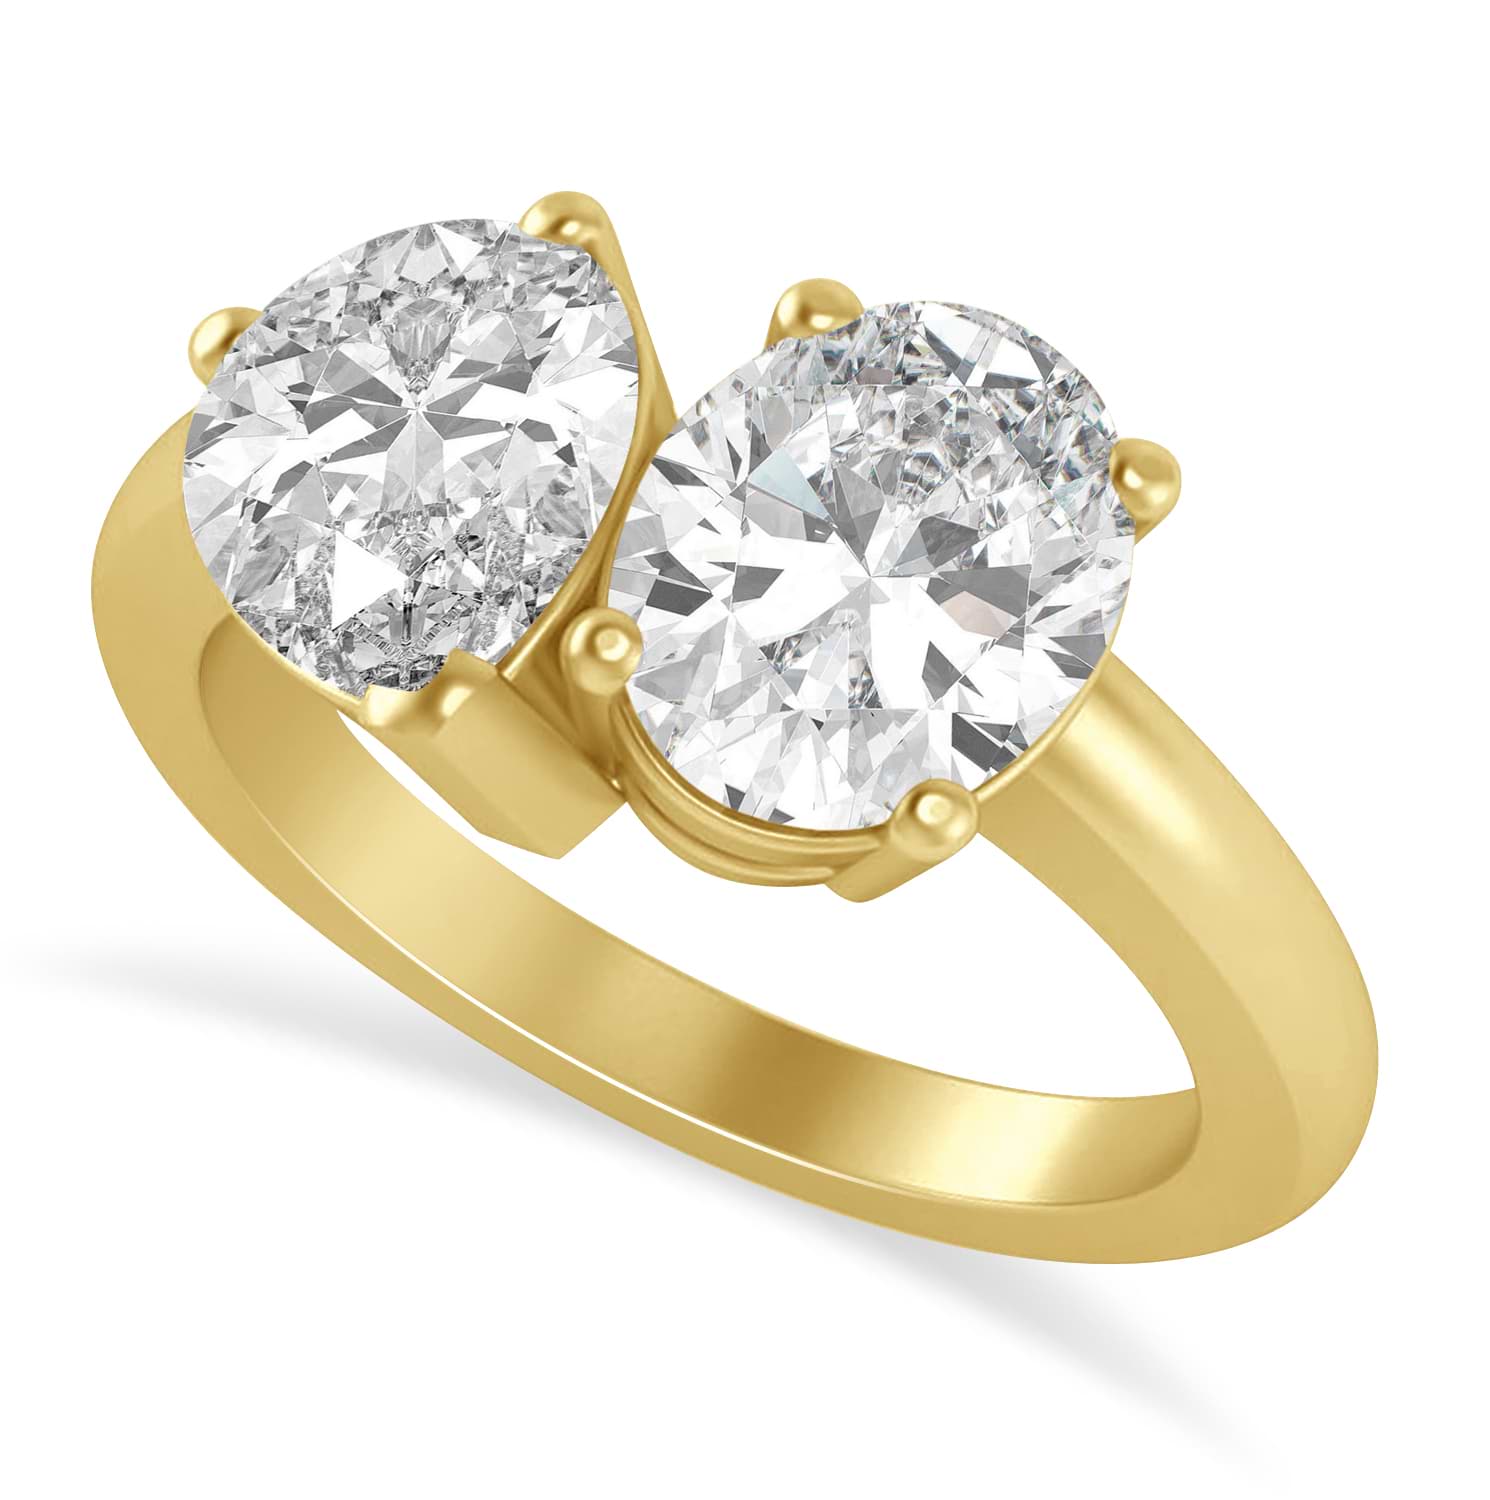 Oval/Pear Lab Grown Diamond Toi et Moi Ring 18k Yellow Gold (4.50ct)